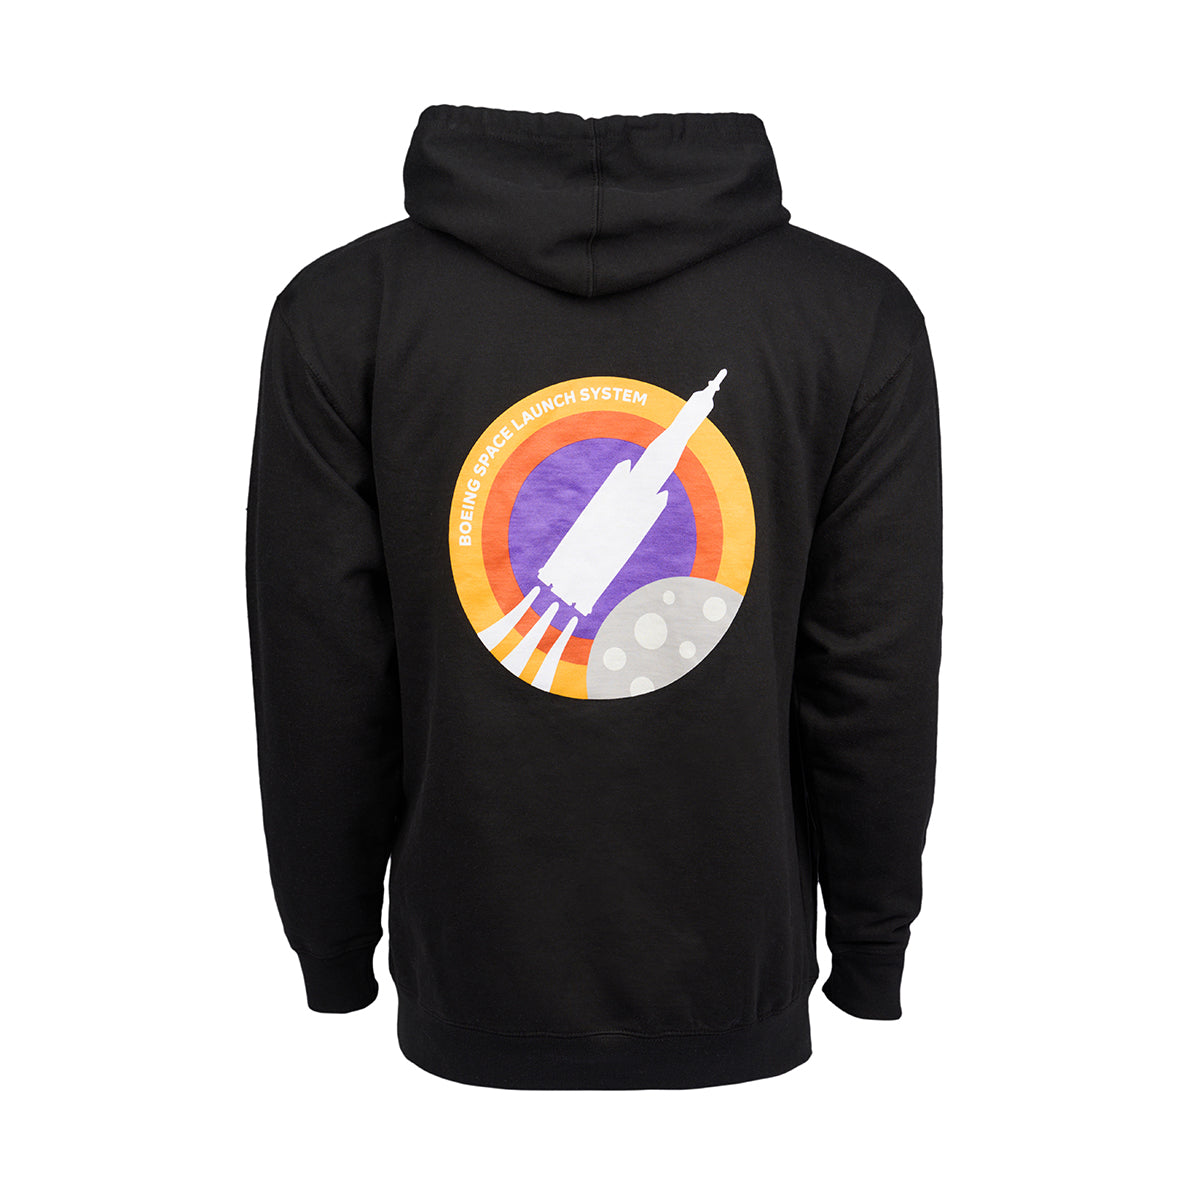 Full product image of the back side of the hooded sweatshirt in a black color.  Showing the Skyward graphic of the Boeing Space Launch System.